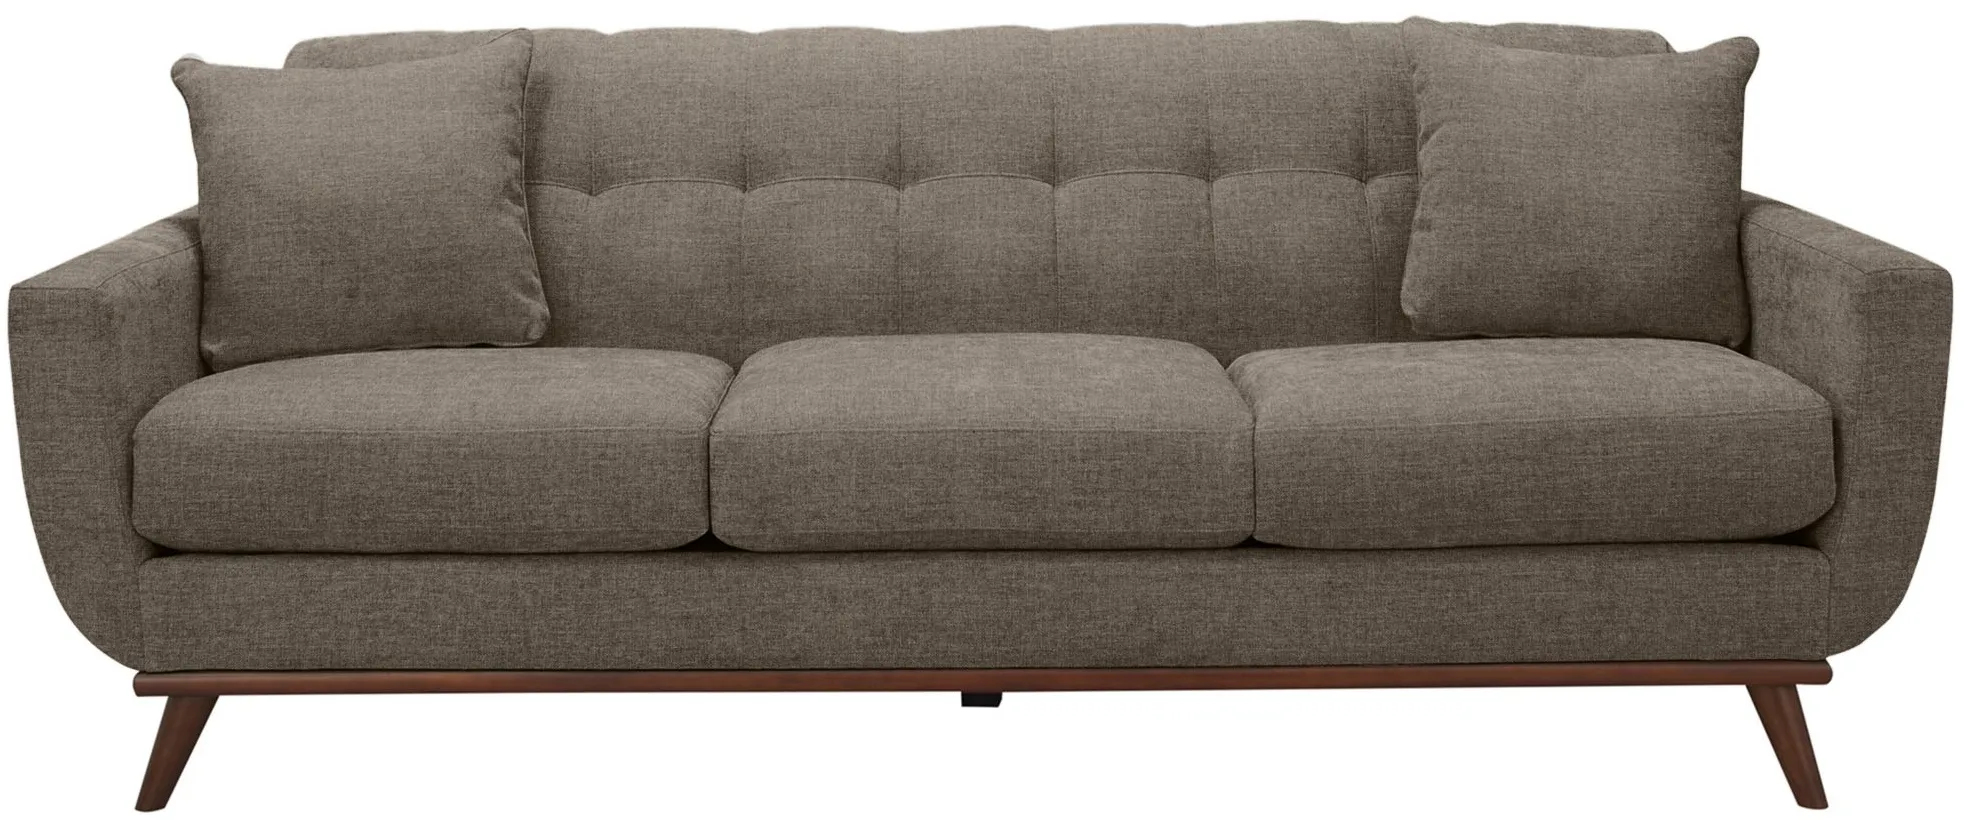 Milo Sofa in Santa Rosa Taupe by H.M. Richards